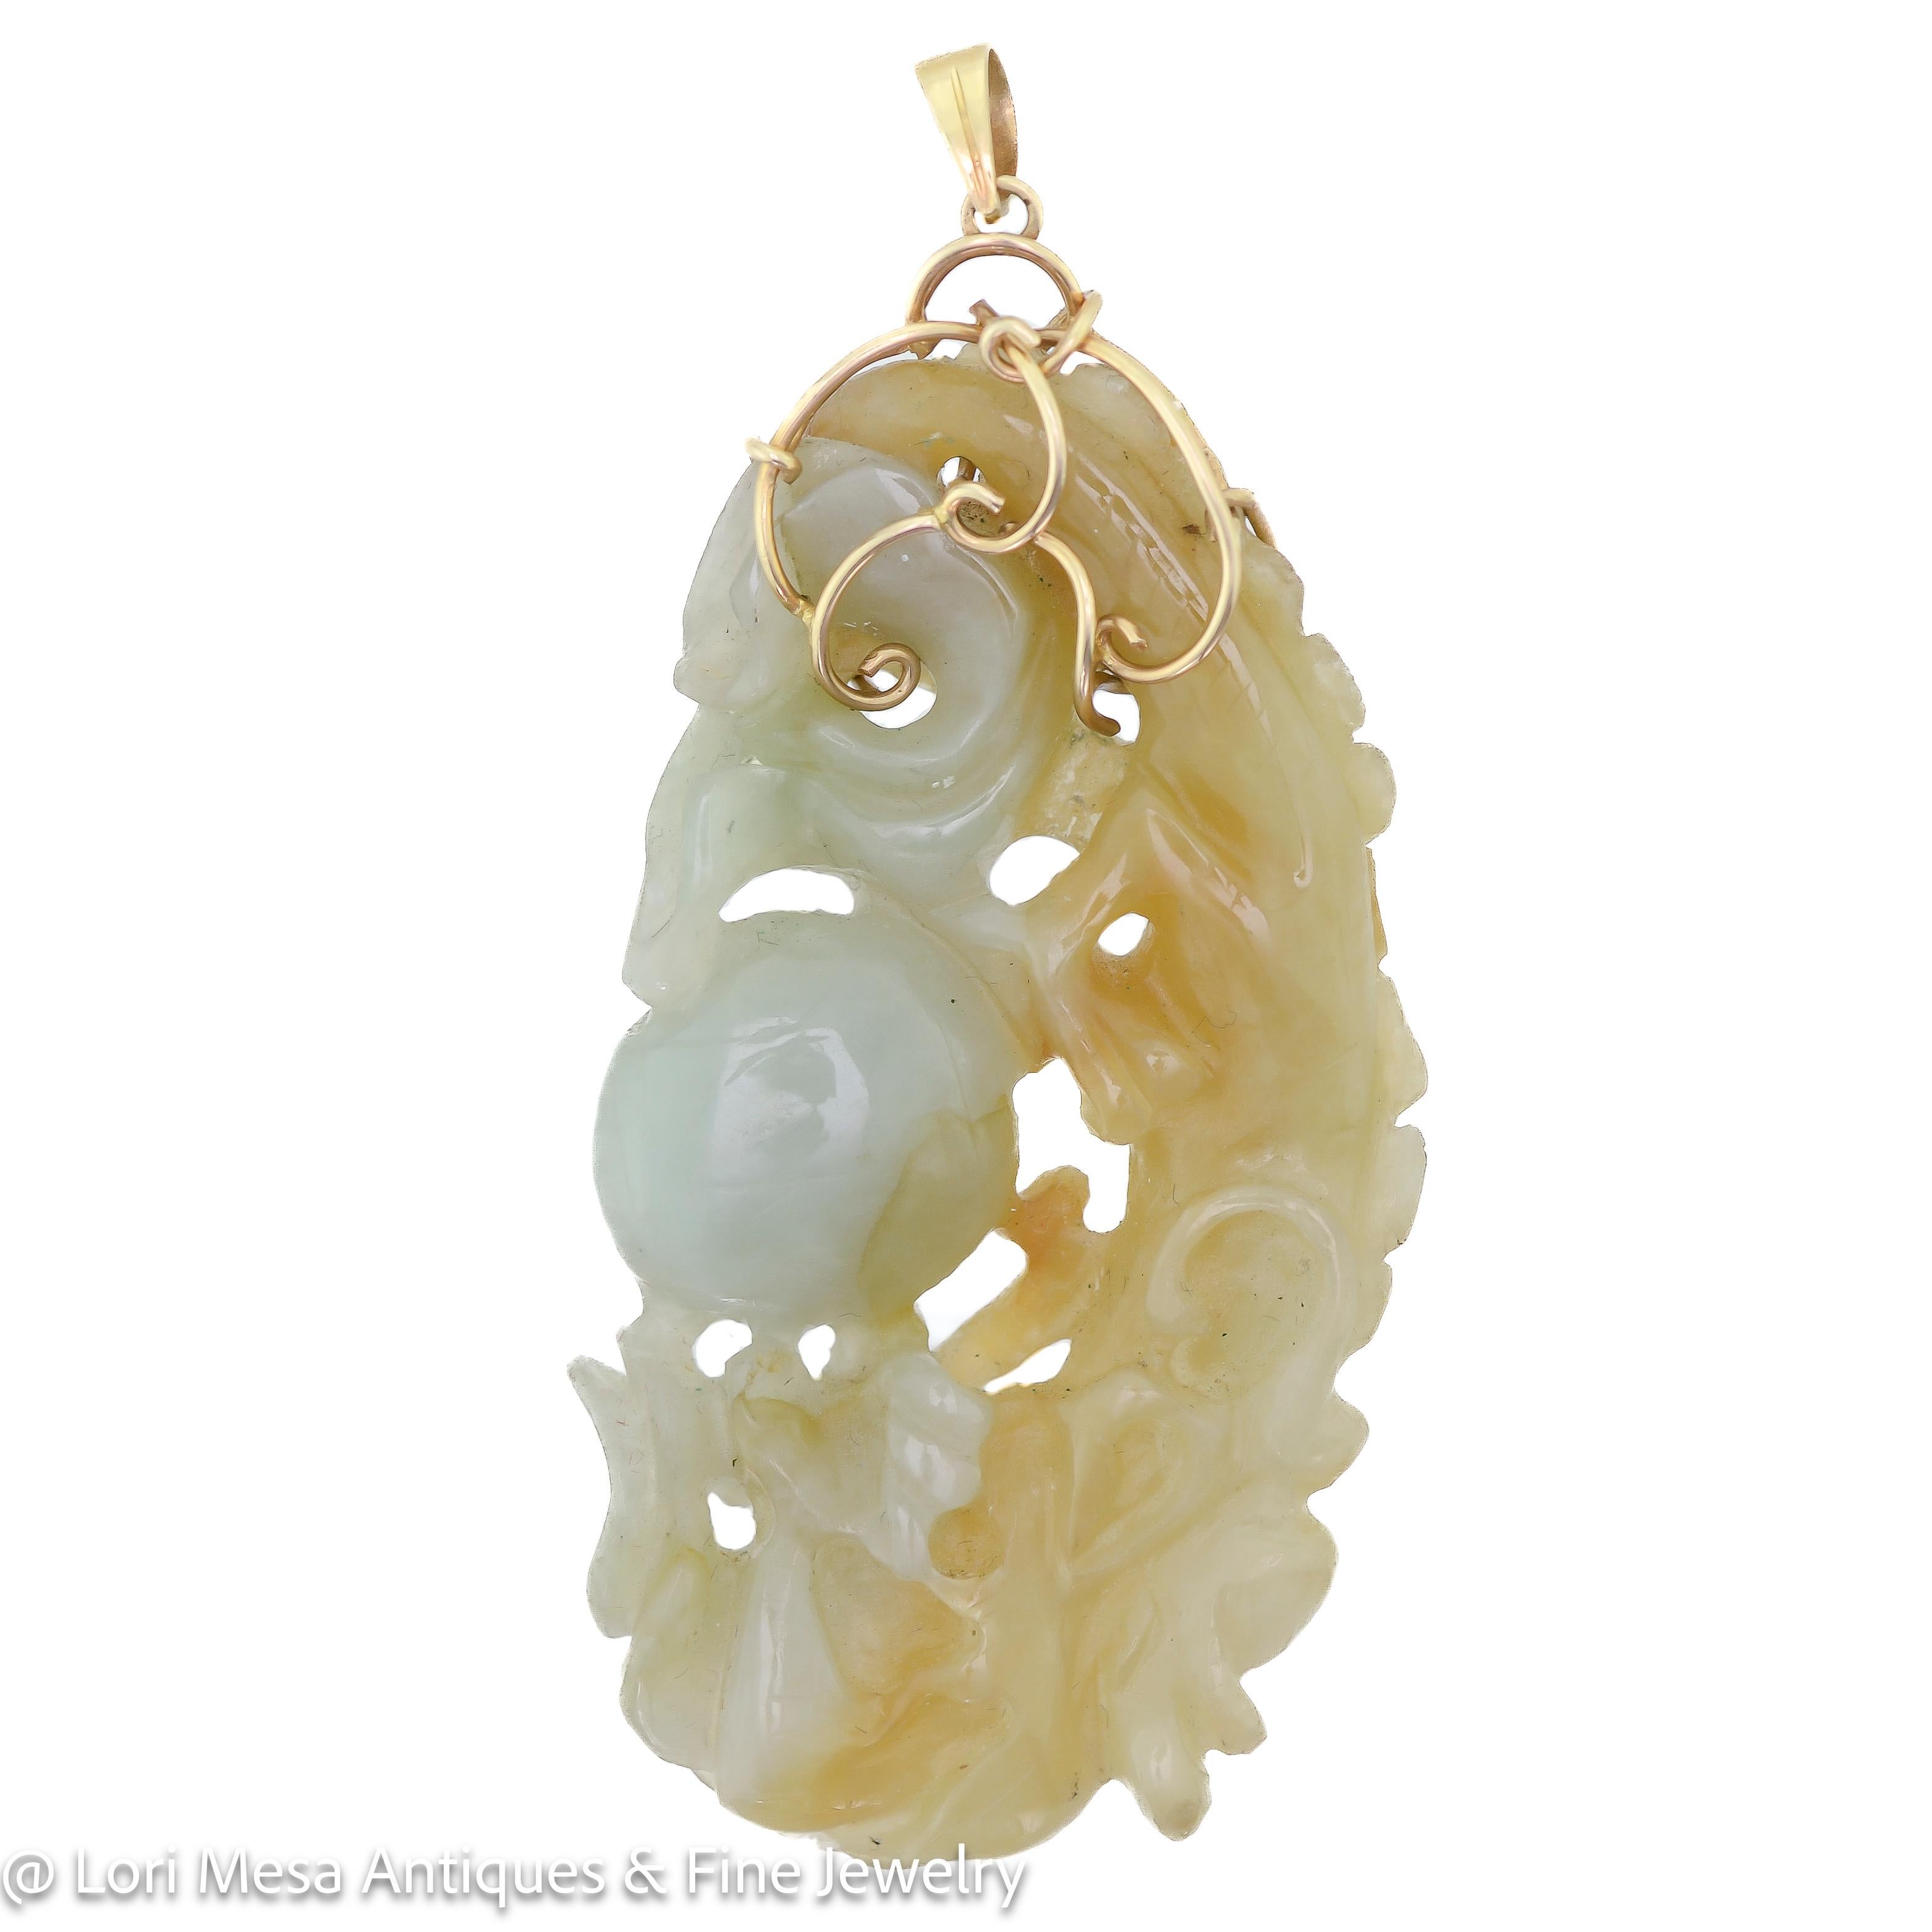 This is a vintage pendant that has been beautifully carved from jade. The pendant comes in a combination of light brown and pale green colors, which gives it a unique and elegant look. The pendant also features a 